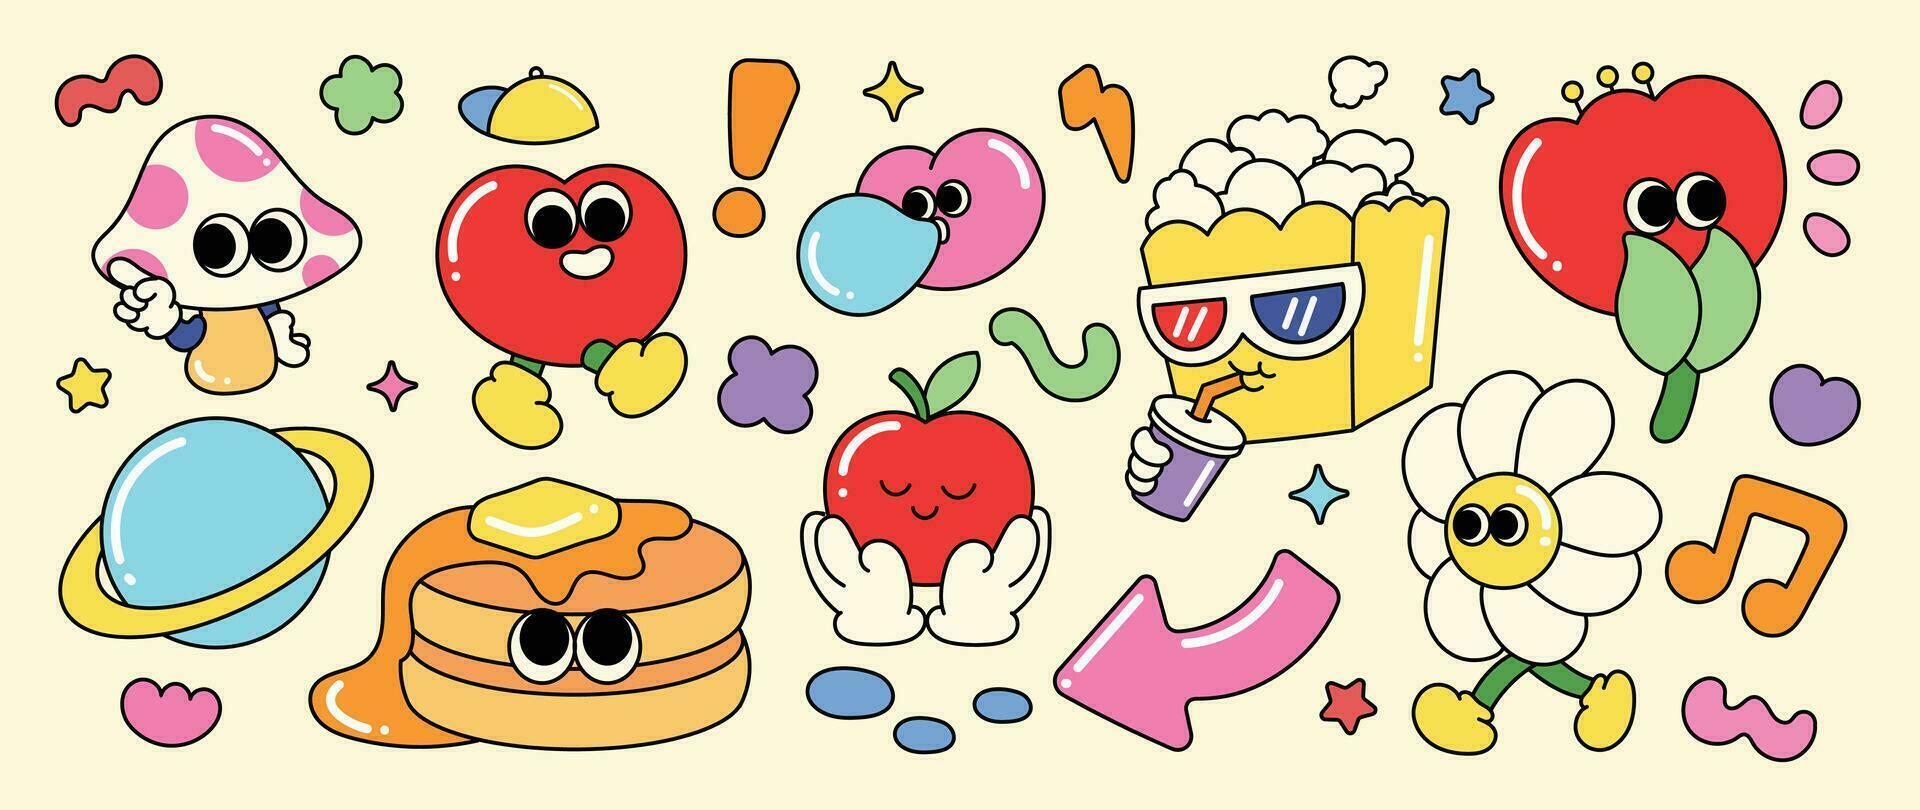 Set of 70s groovy element vector. Collection of cartoon characters, doodle smile face, heart, apple, pancake, popcorn, mushroom, flower, star. Cute retro groovy hippie design for decorative, sticker. vector